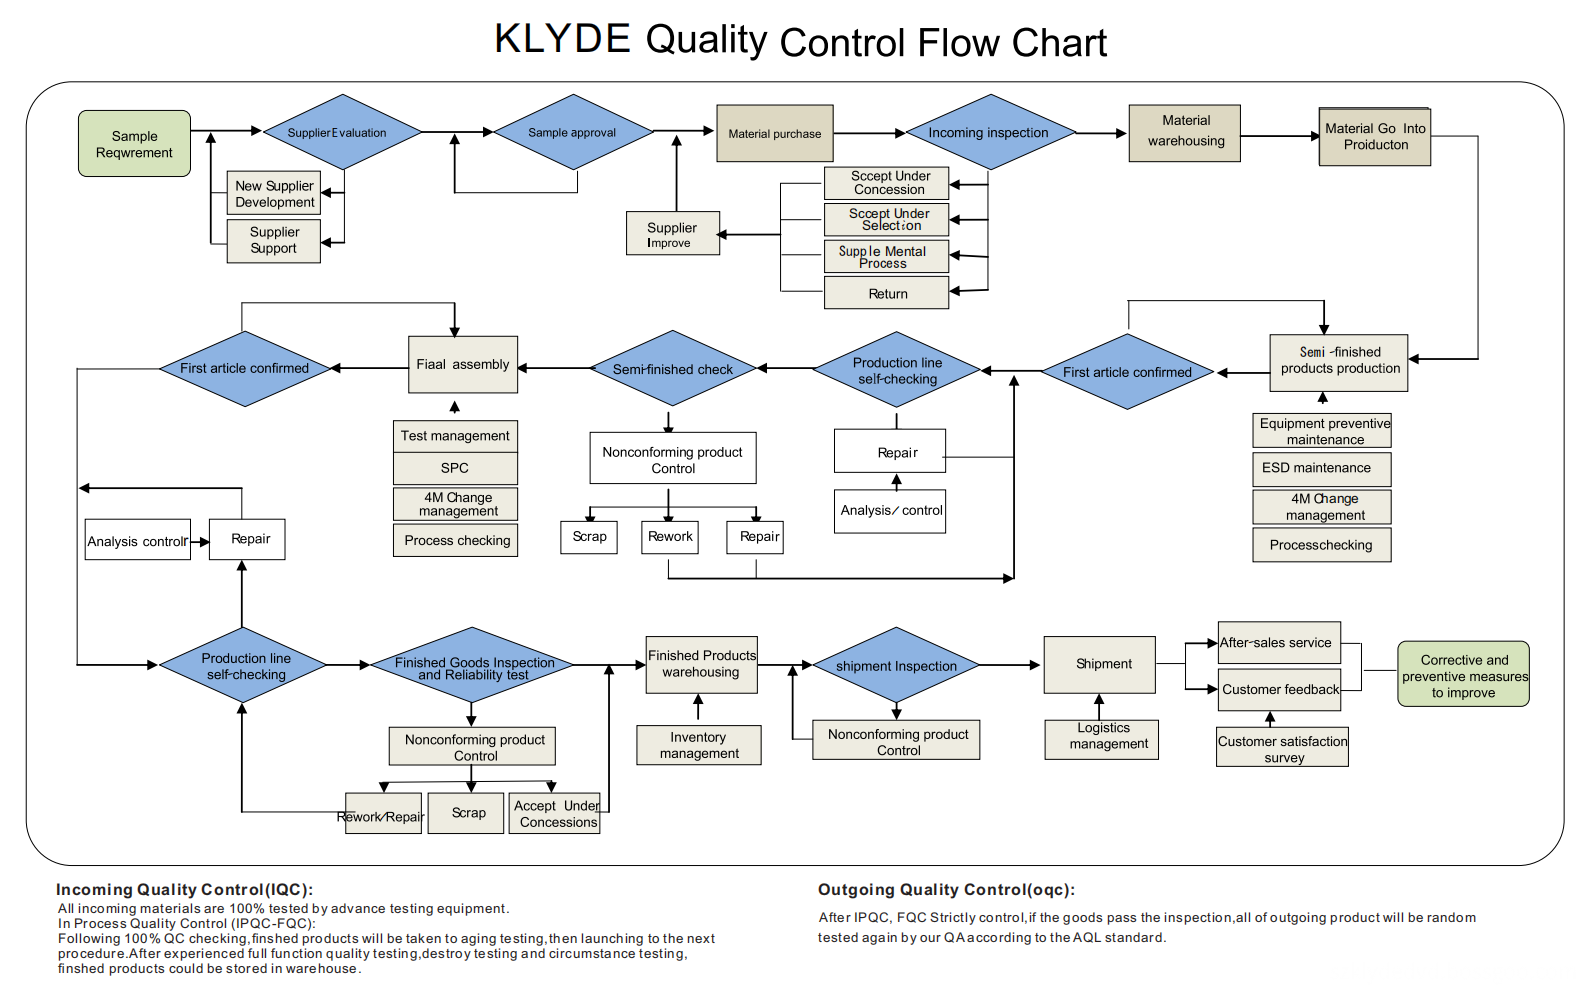 KLYDE QUALITY CONTROL FLOW CHART